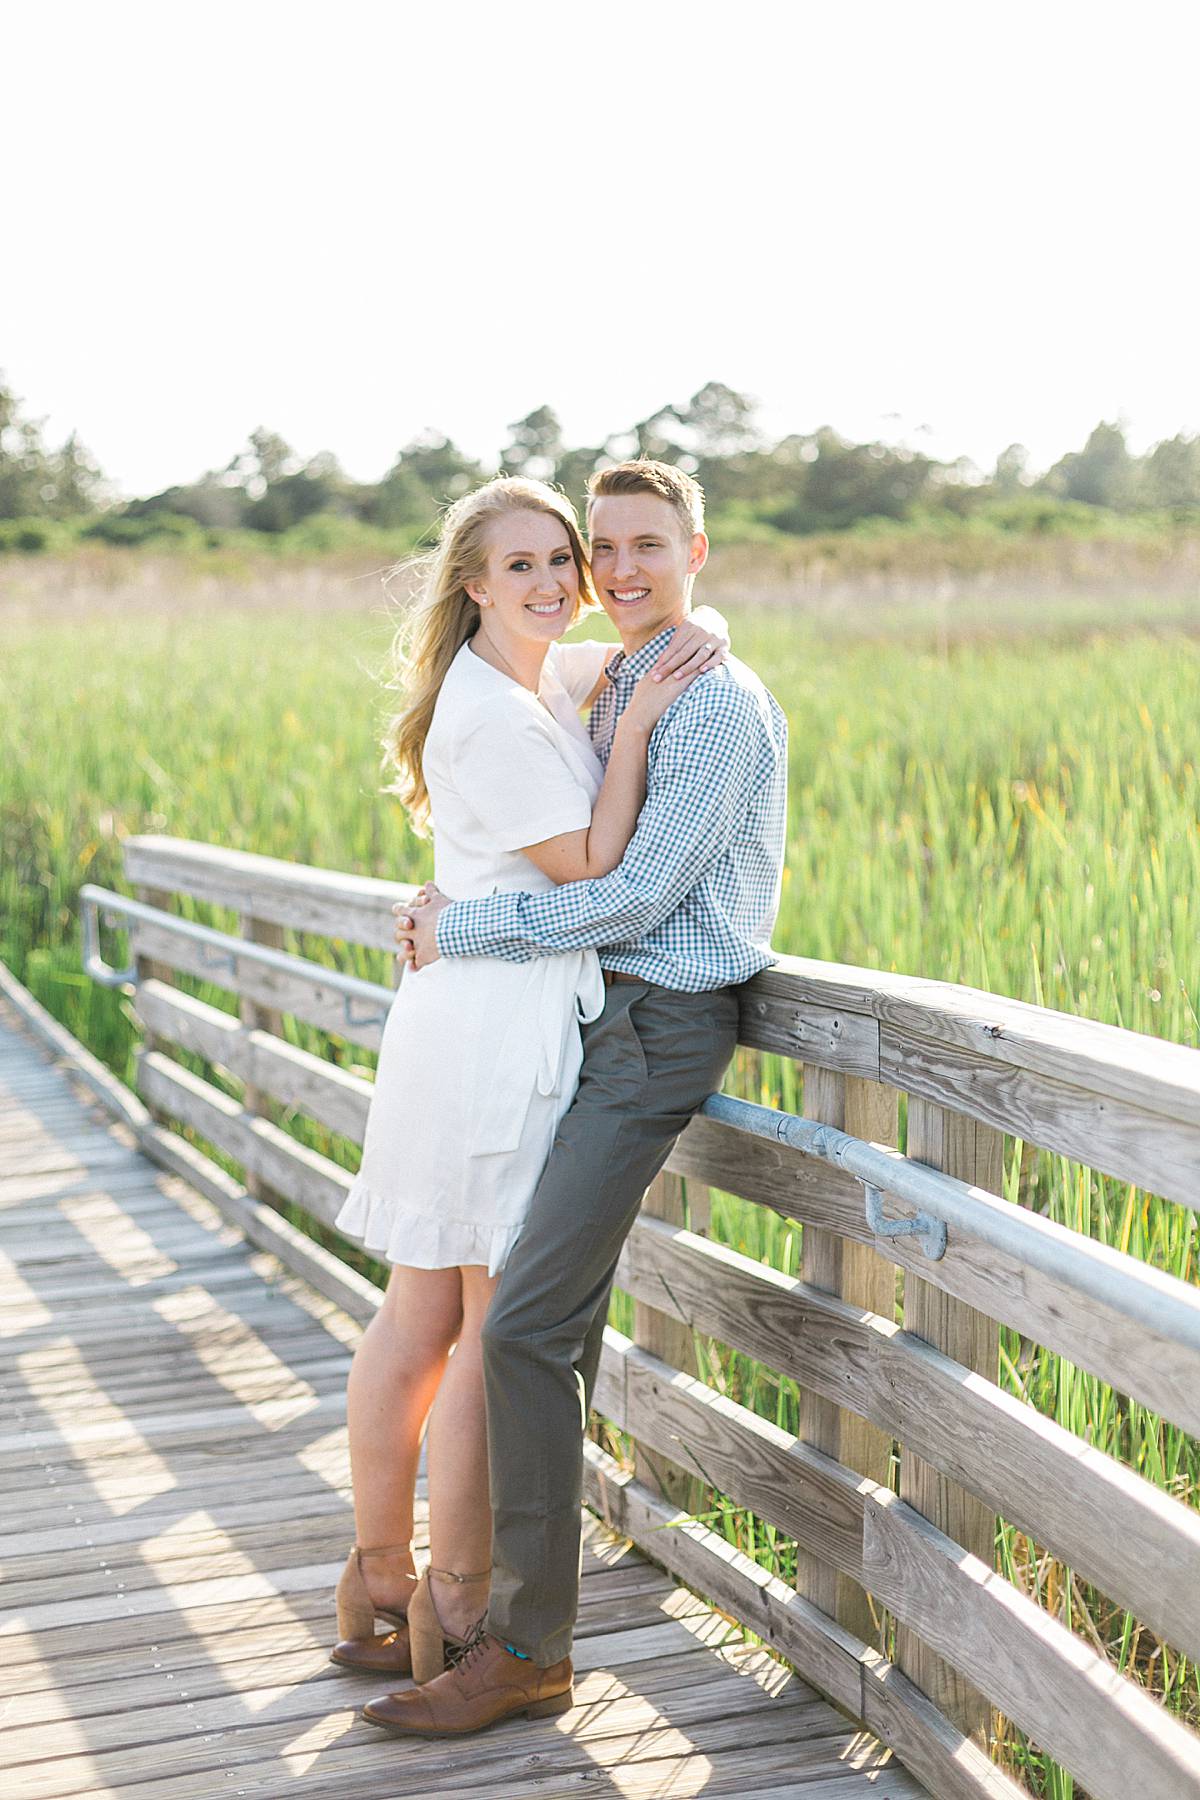 bodie island lighthouse, outer banks, north carolina beachfront destination and romantic elegant engagement session photos with a long dress, photo by laurelyn savannah photography